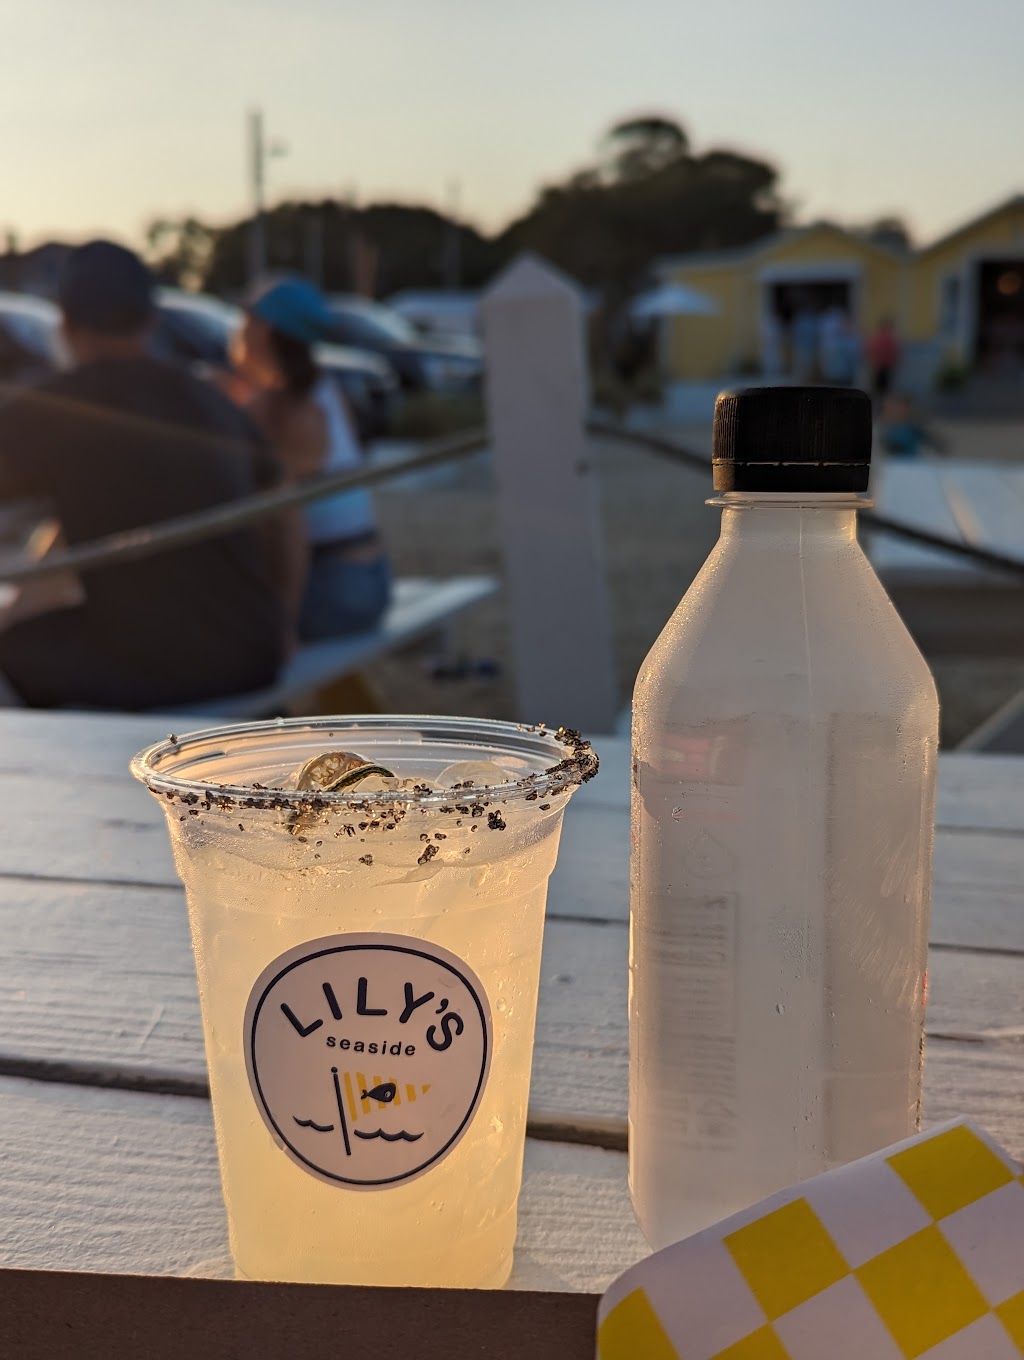 Lilys Seaside at Silly Lily | Silly Lily Fishing Station, 99 Adelaide Ave, East Moriches, NY 11940 | Phone: (631) 407-0008